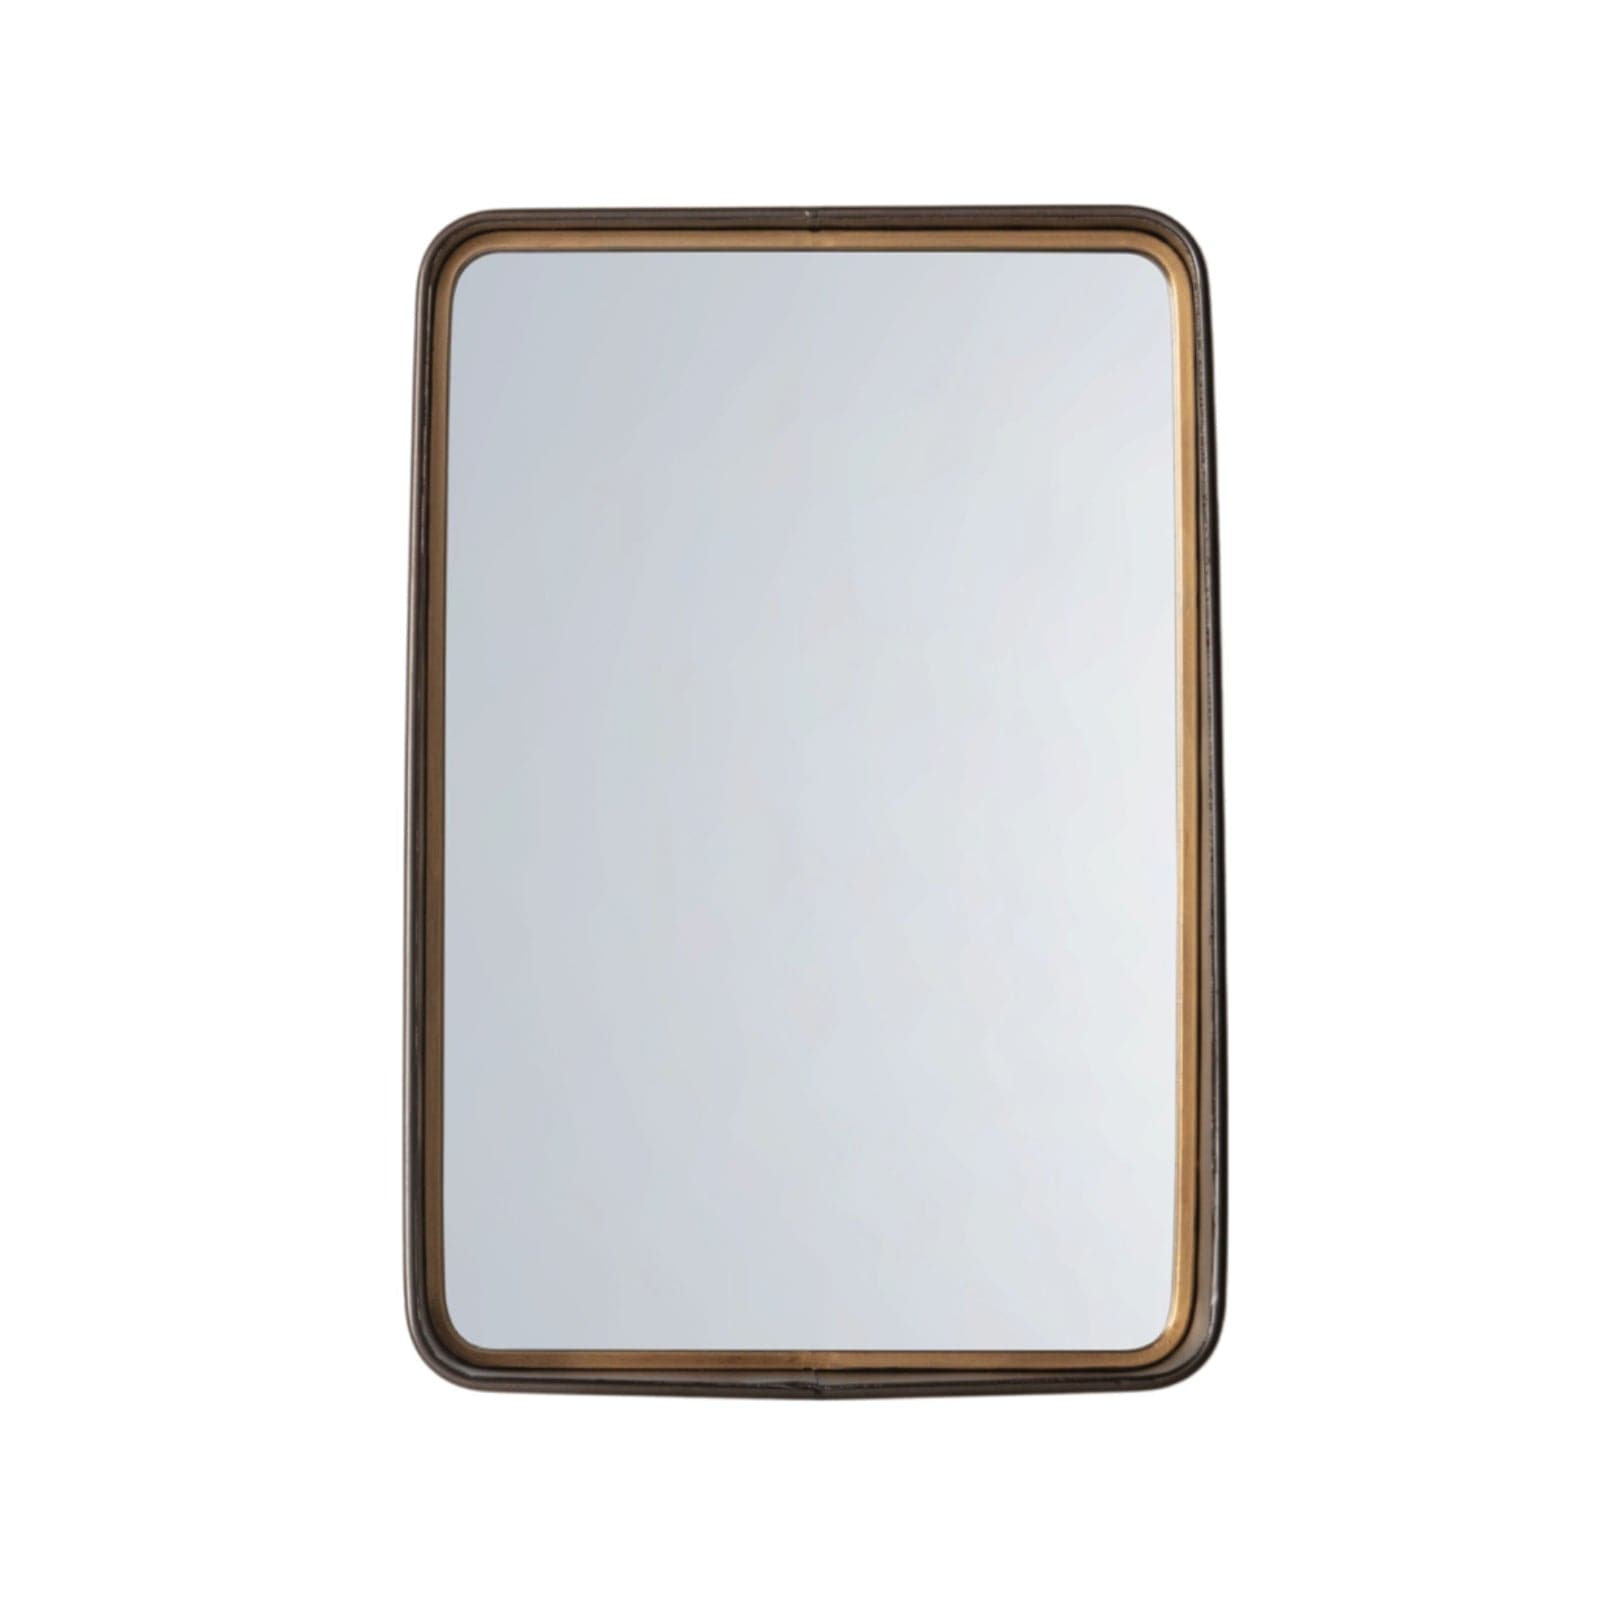 Industrial Tapered Frame Portrait Mirror - The Farthing